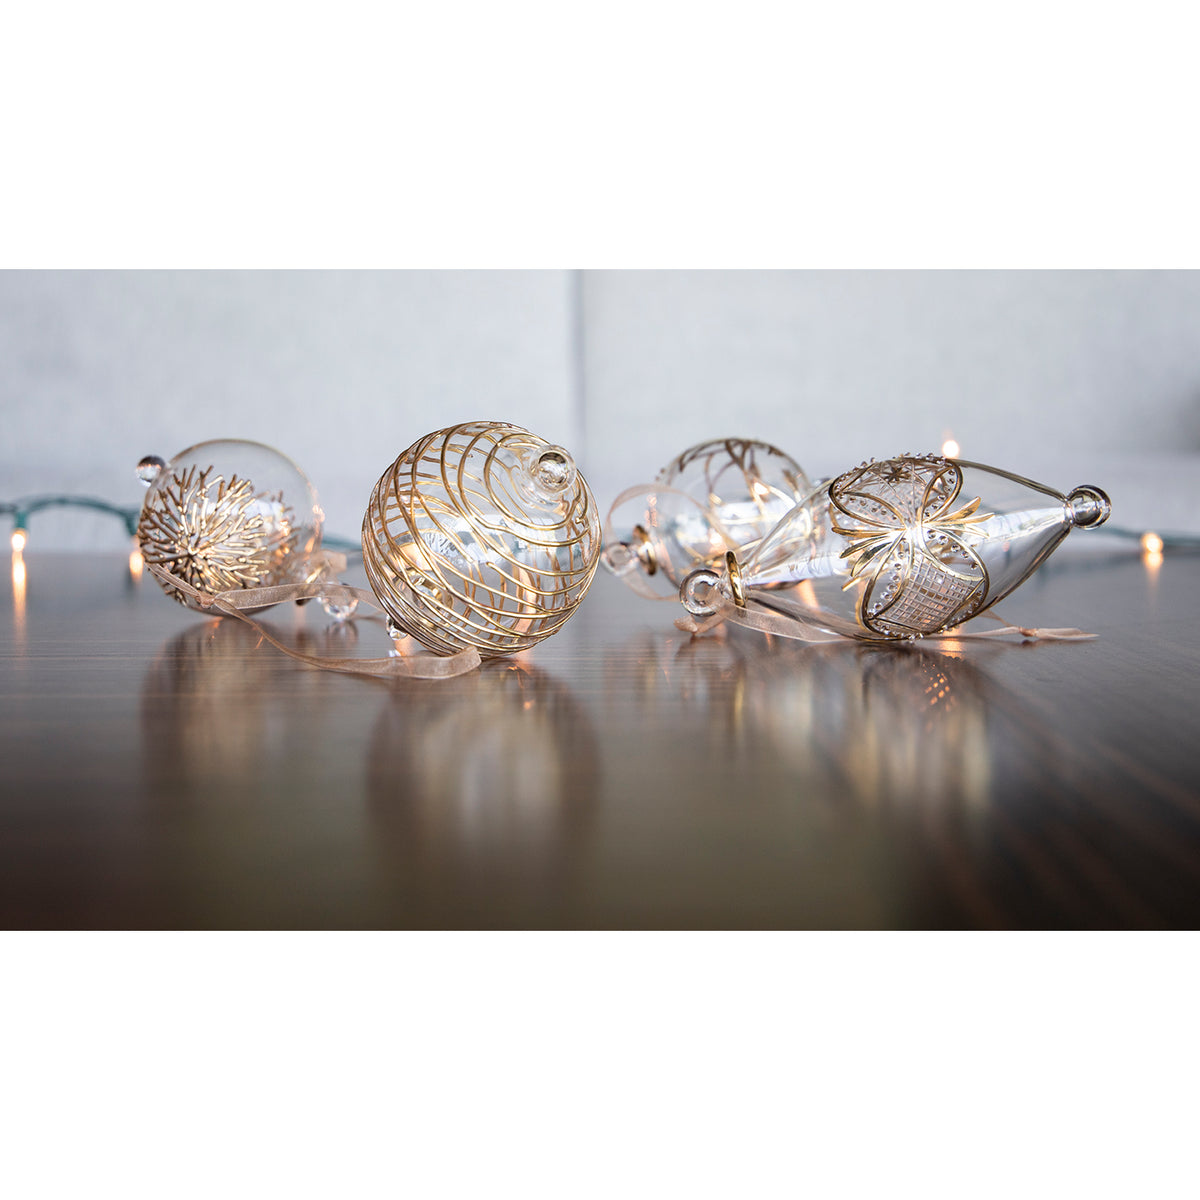 Blown Glass Ornament - Oval Gold Carousel